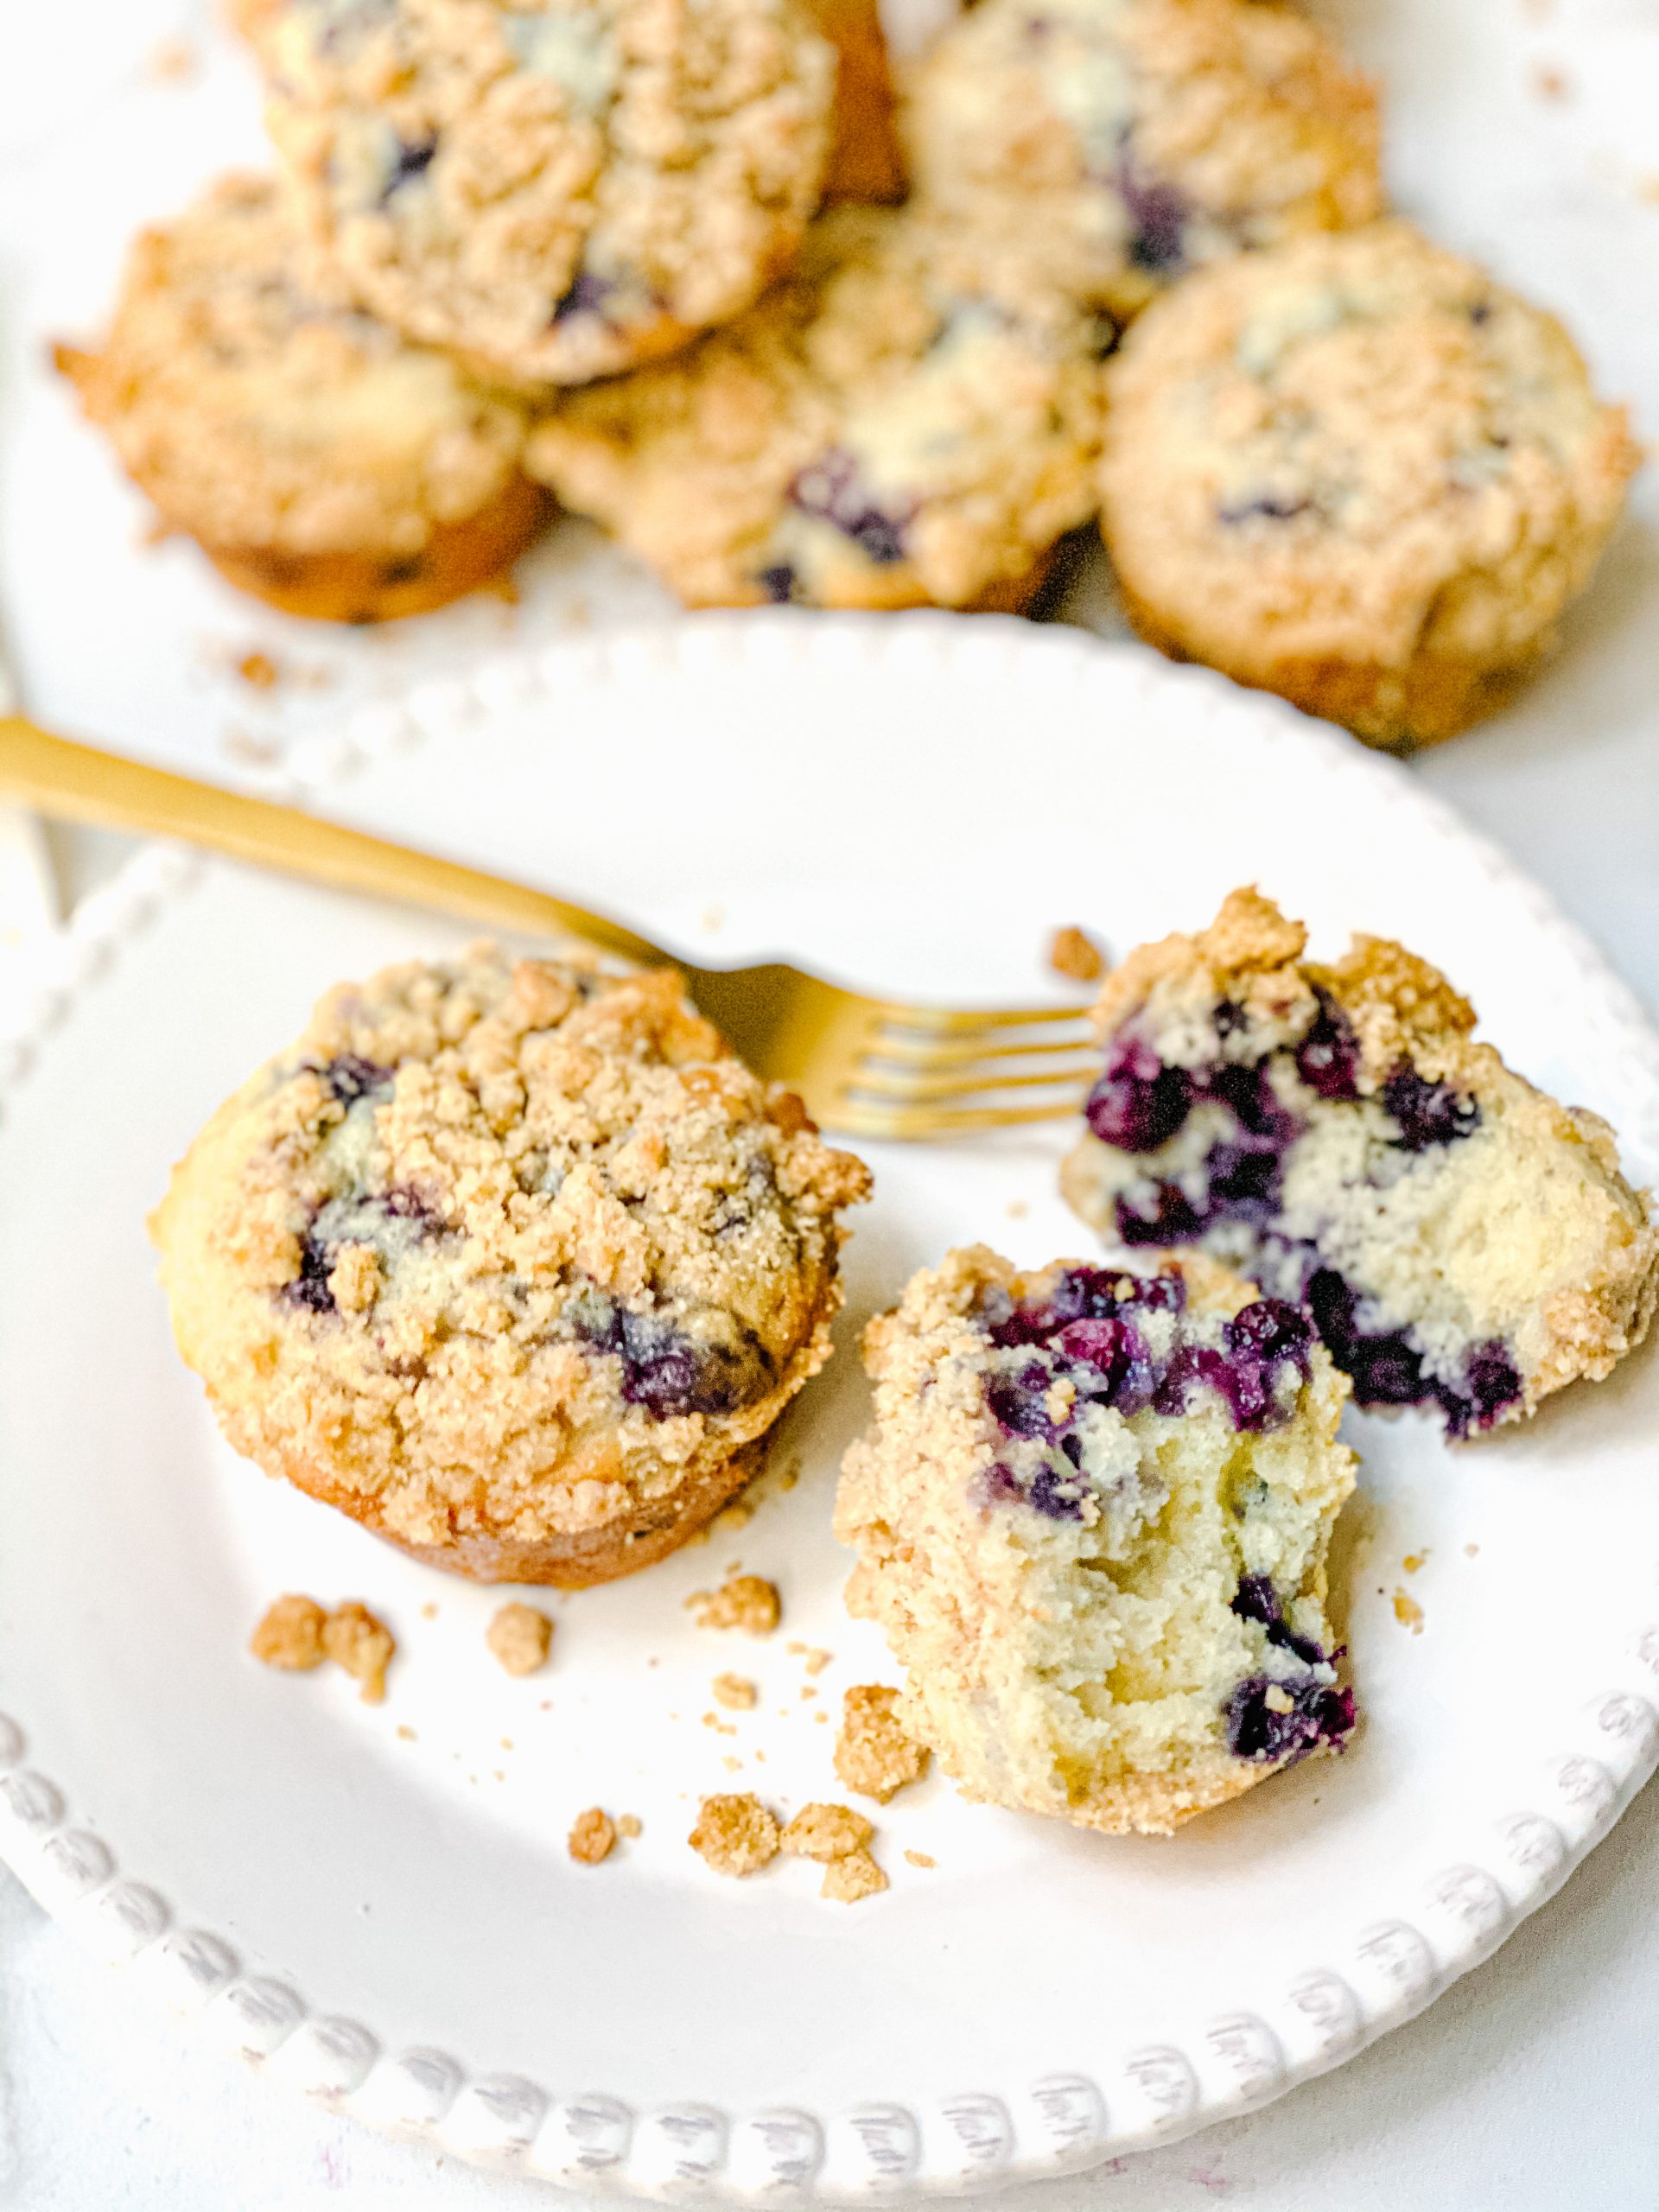 Cinnamon Crumble Top Blueberry Muffins - Plum Street Collective